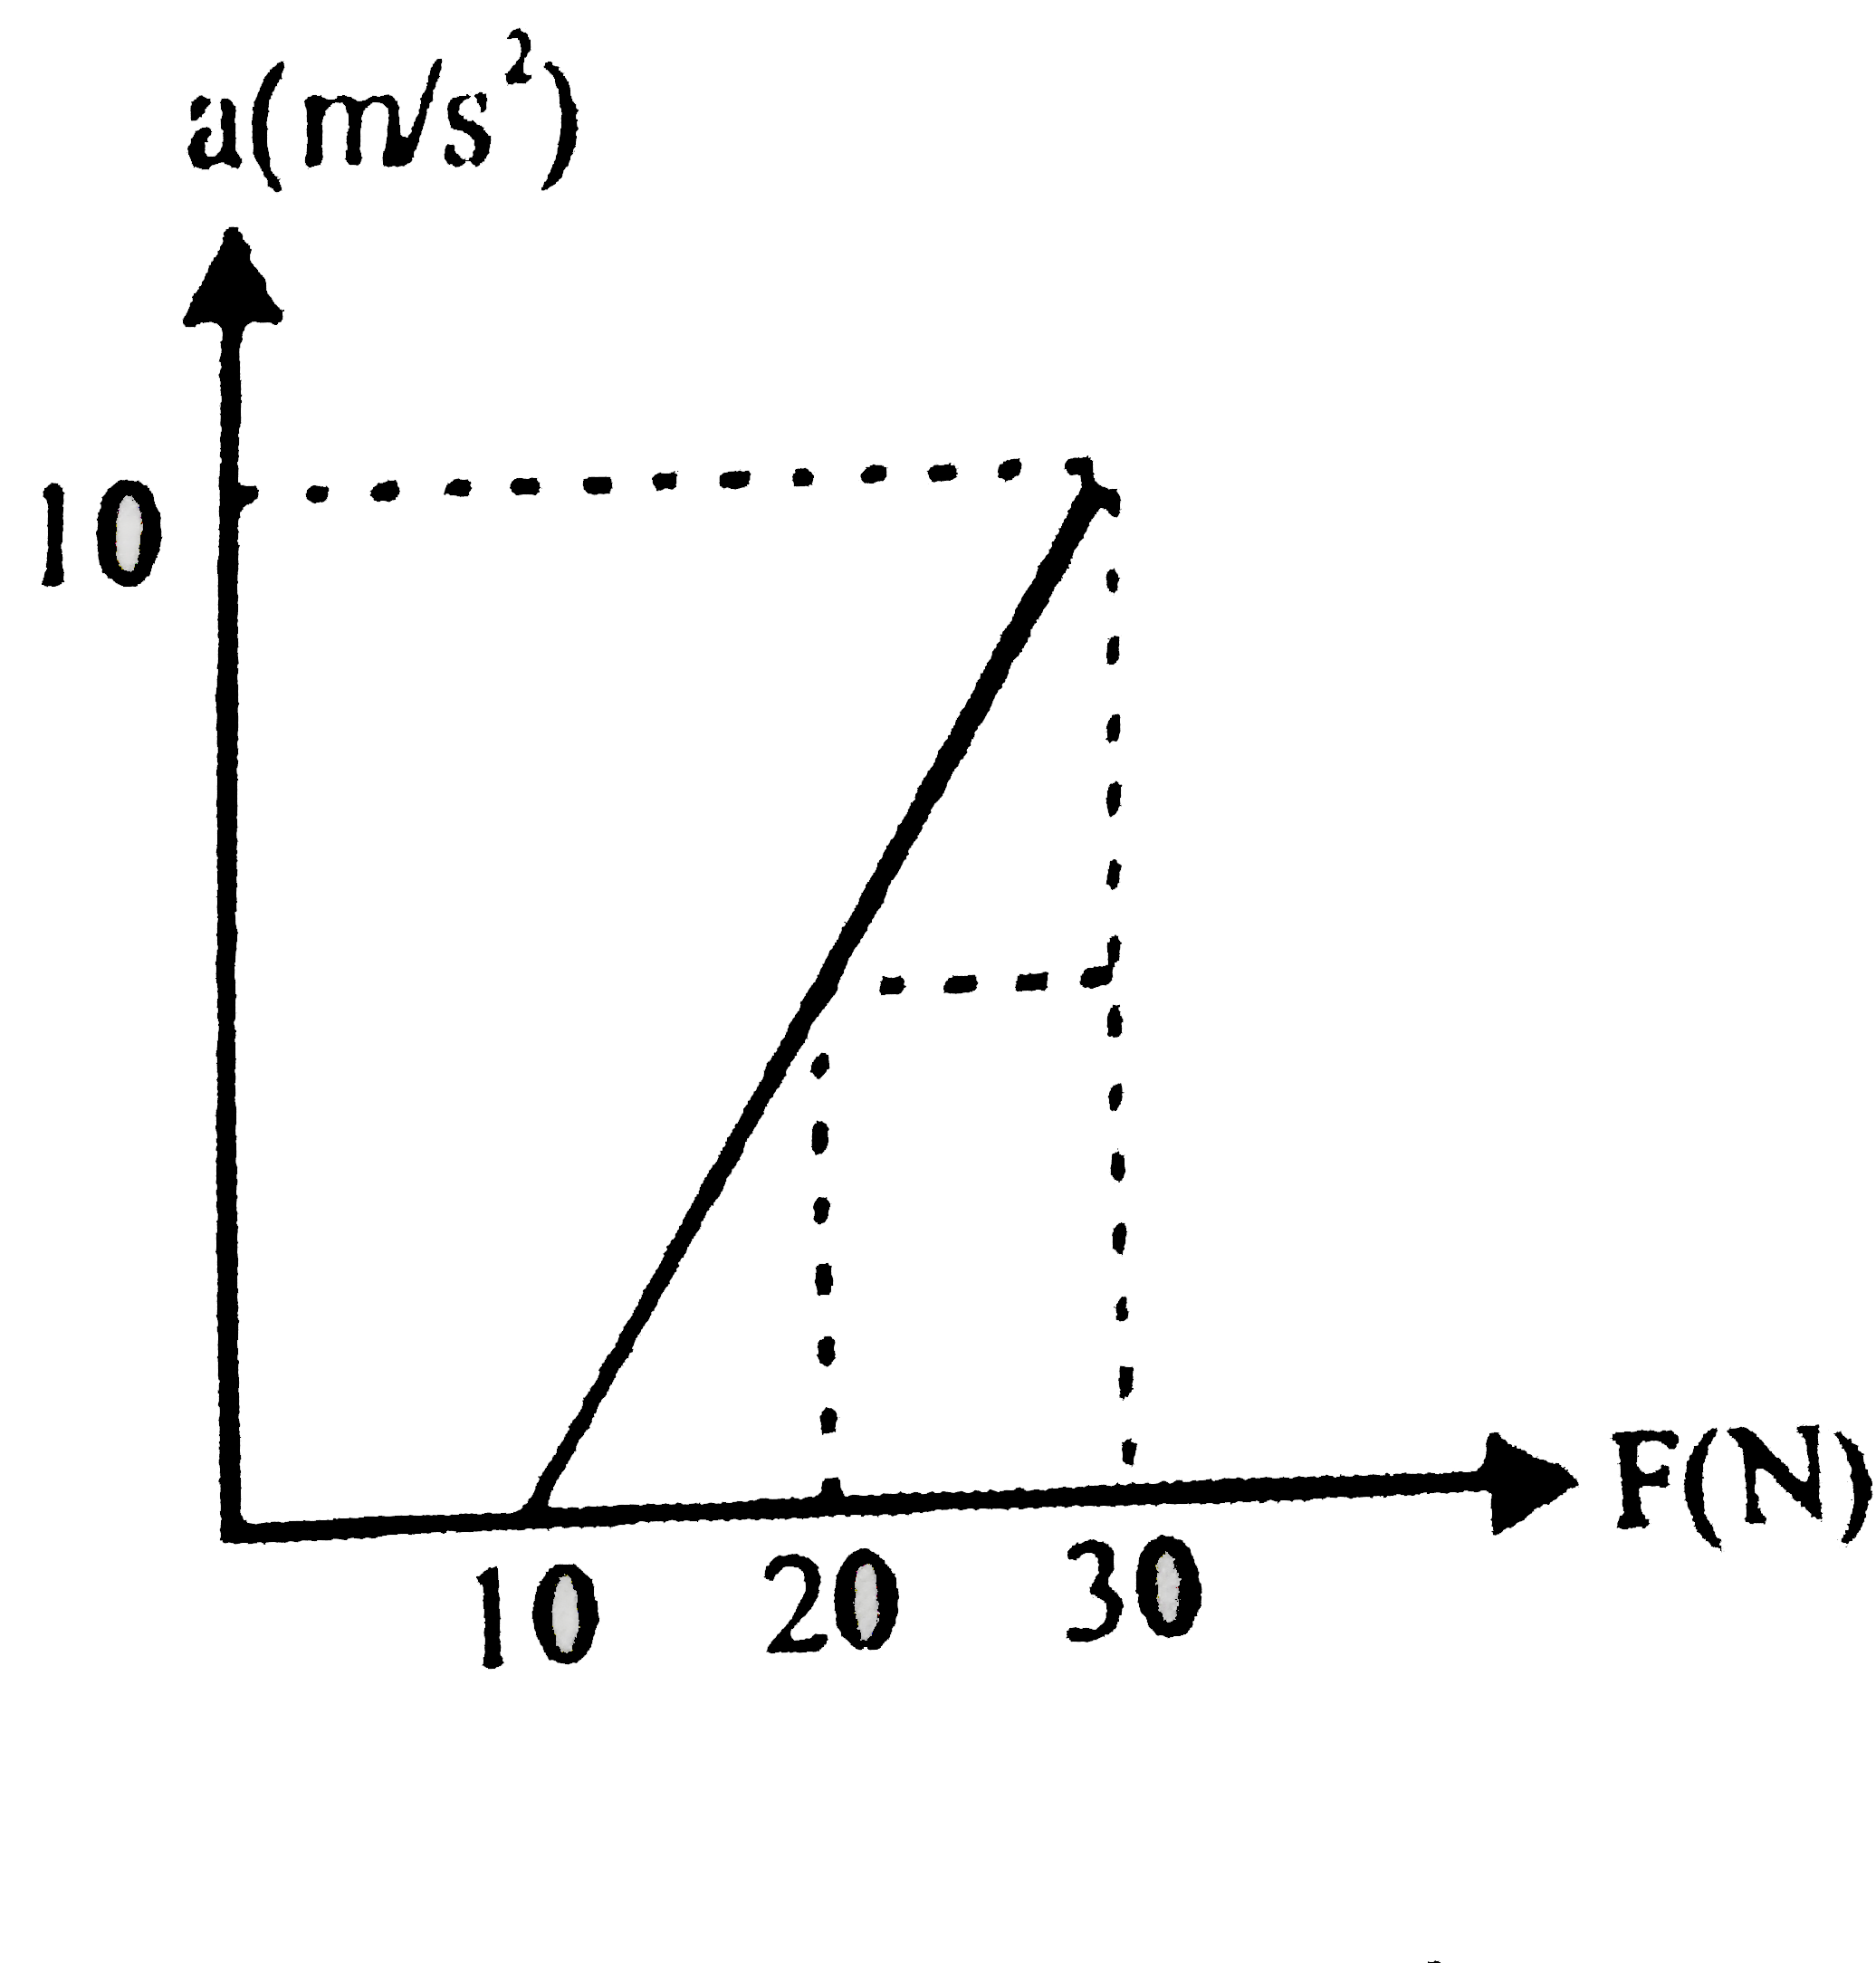 A block placed on a rough horizontal surface is pushed with a force F acting horizontally on the block. The magnitude of F is increased and acceleration produced is plotted in the graph shown.